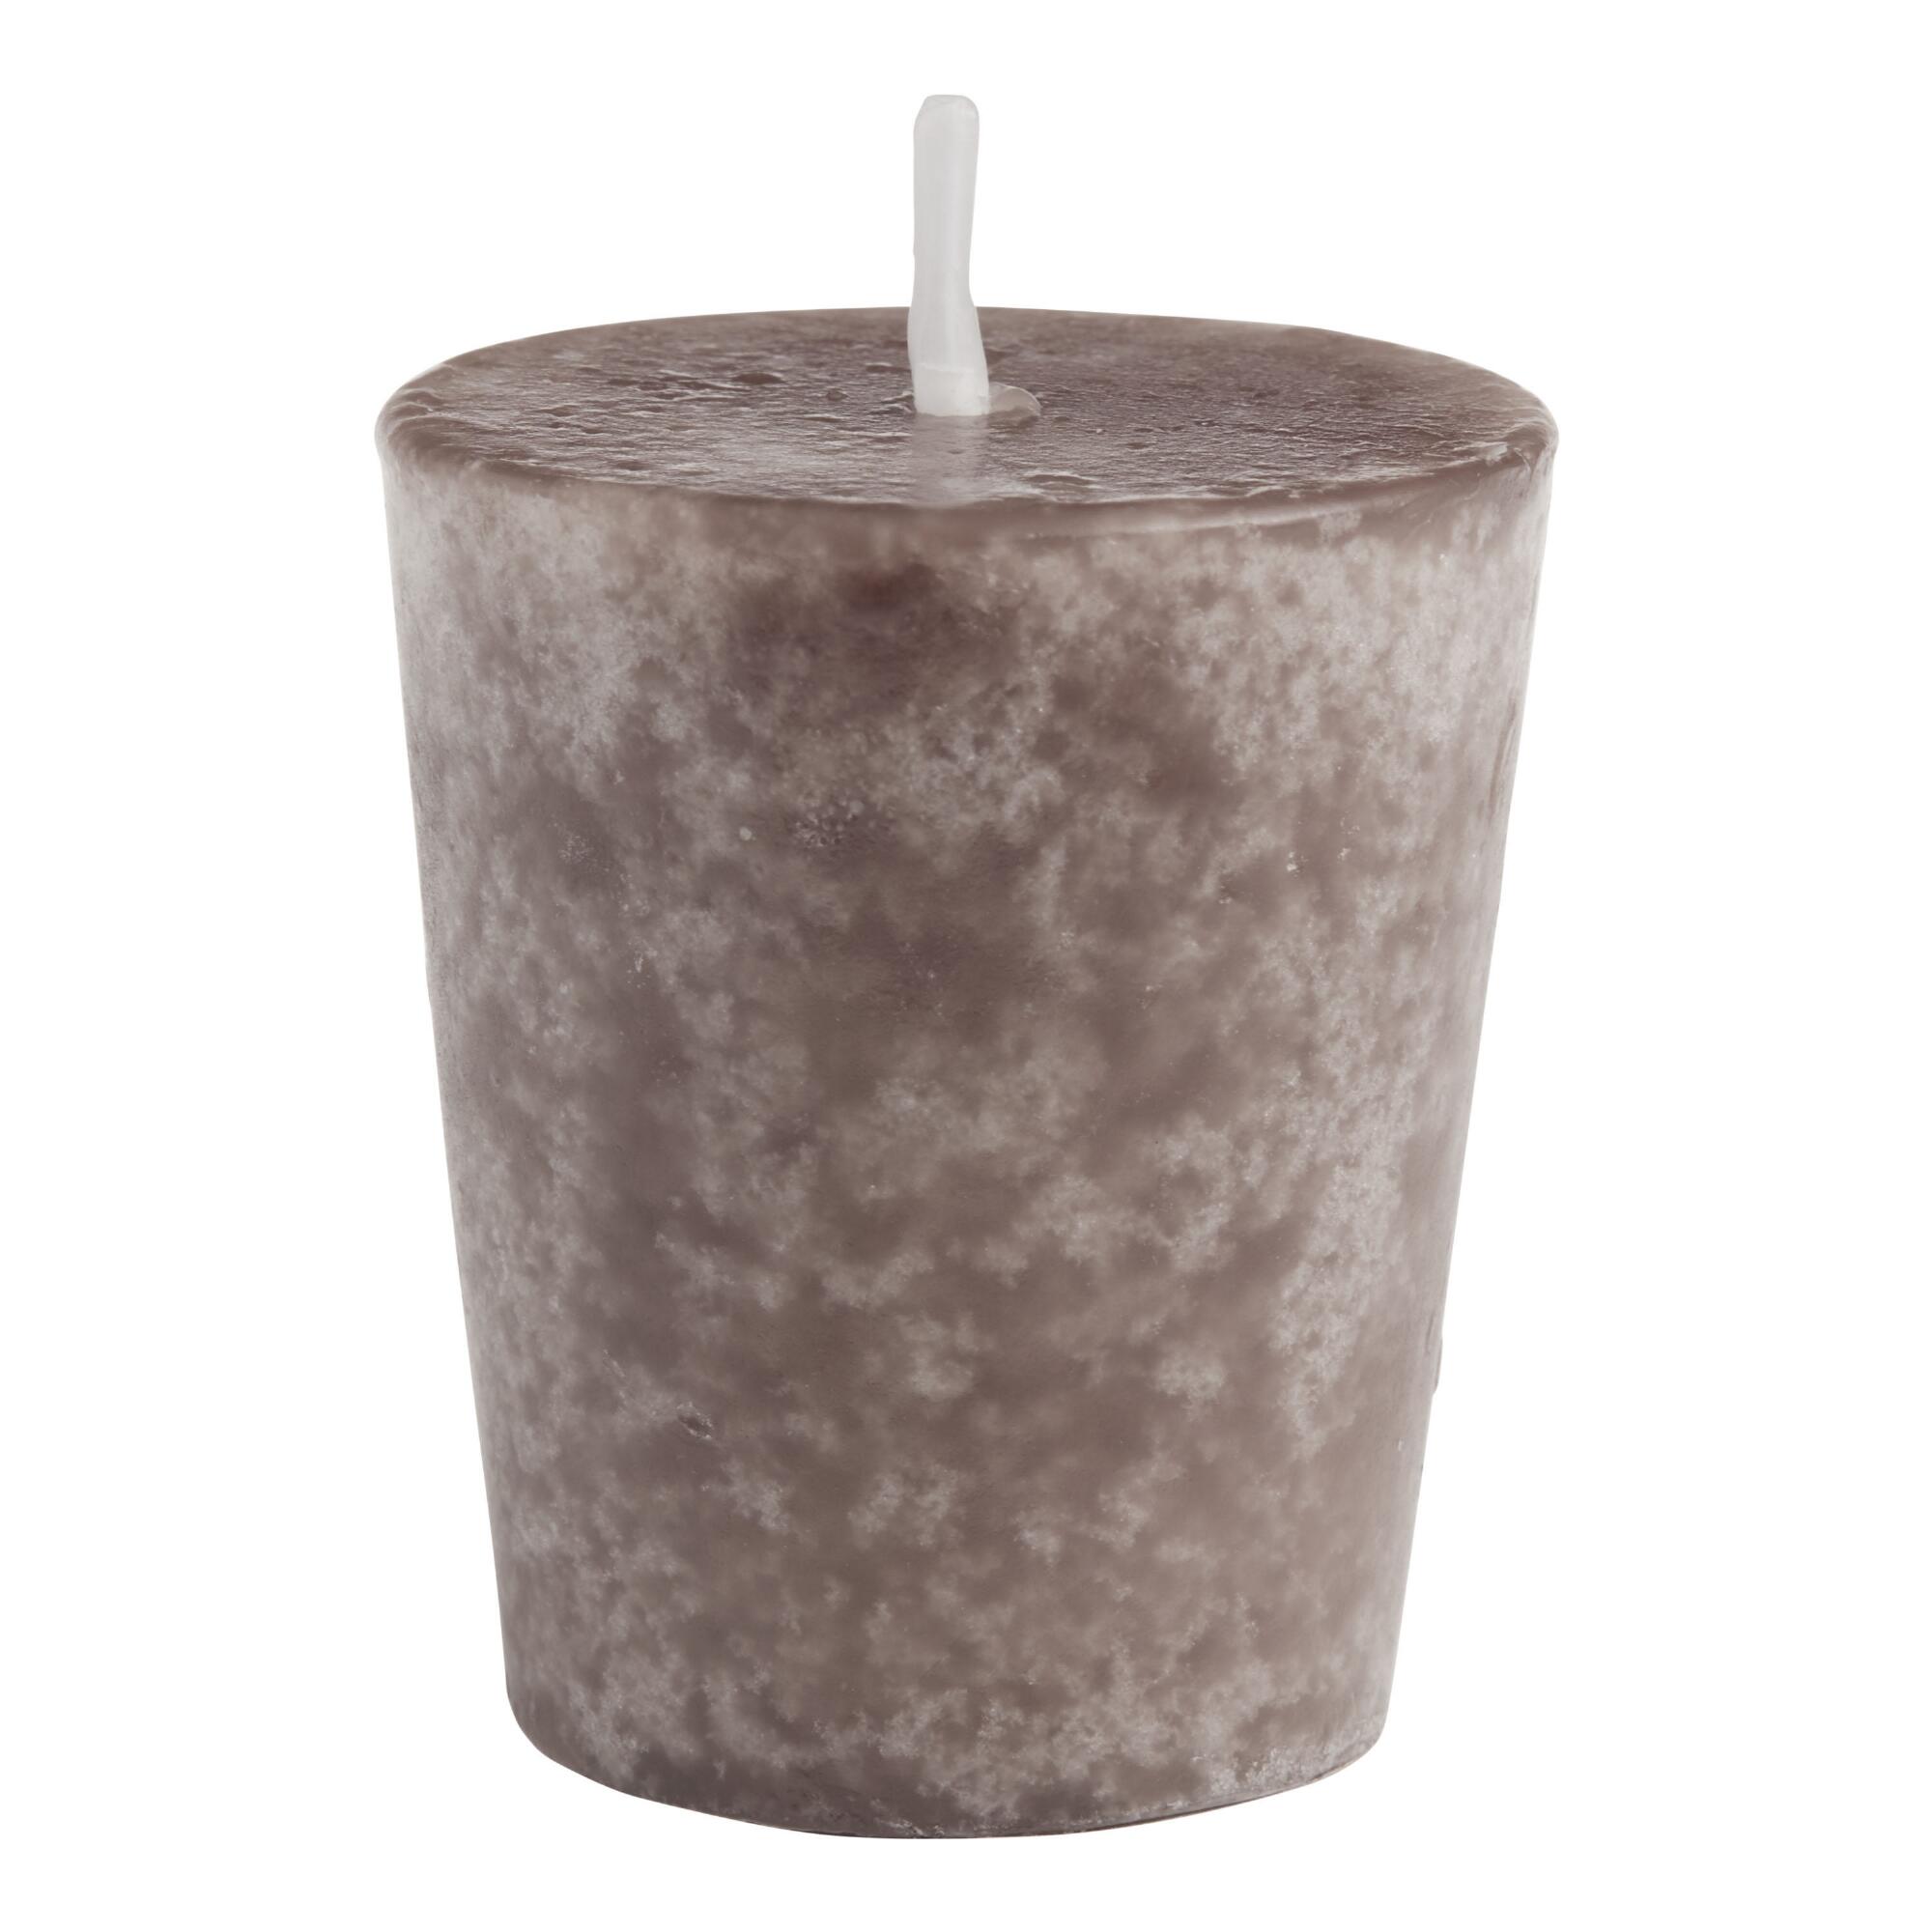 Bergamot Linen Mottled Votive Scented Candles 4 Pack: Gray - Scented Wax by World Market